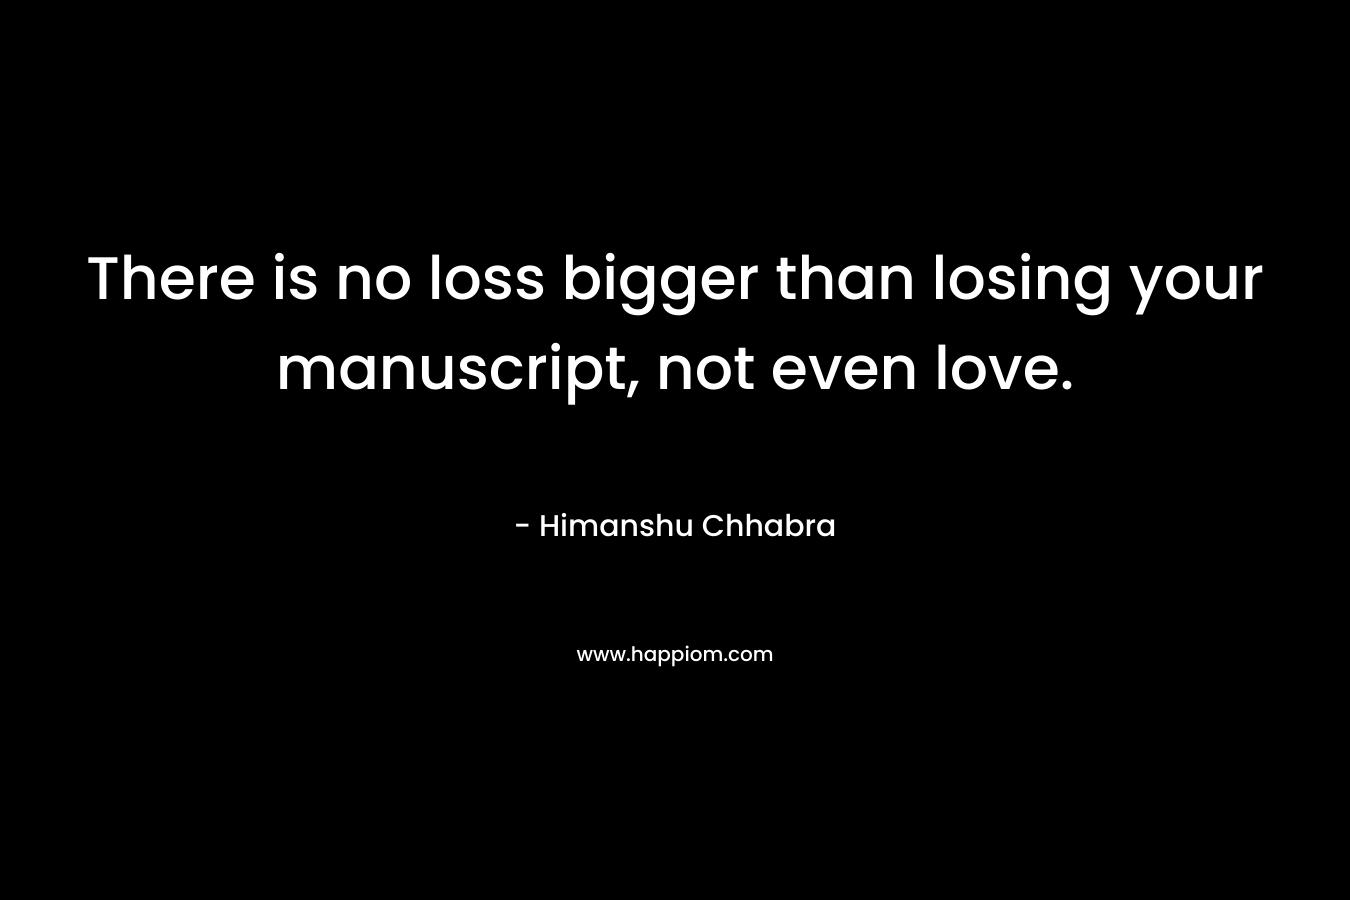 There is no loss bigger than losing your manuscript, not even love. – Himanshu Chhabra